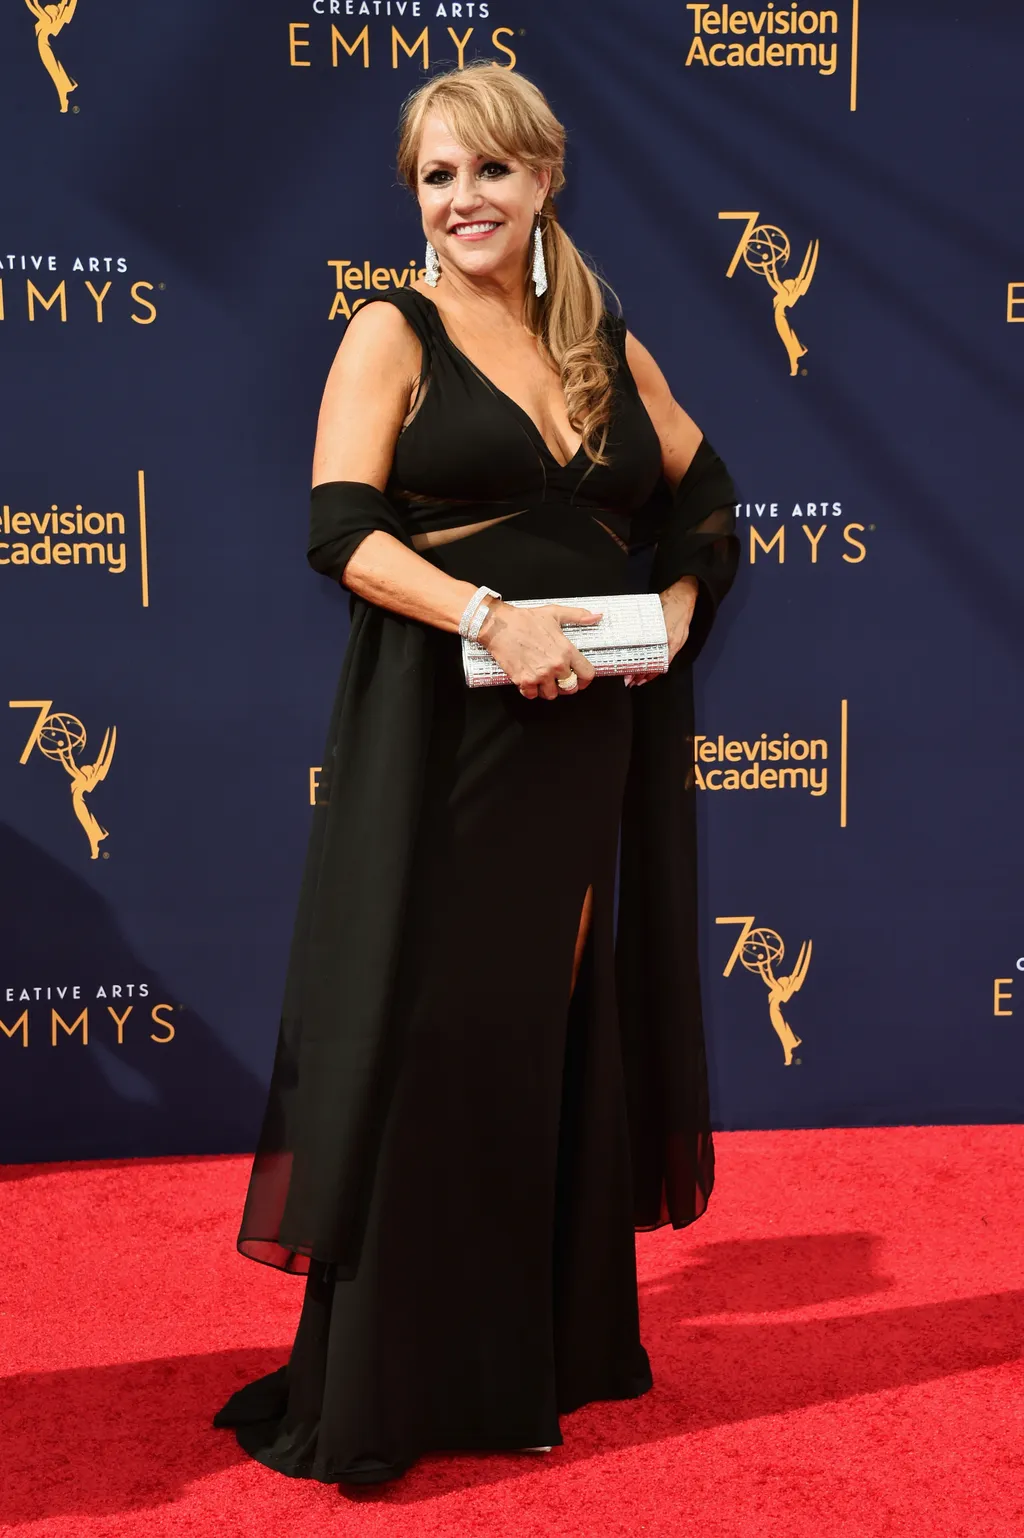 2018 Creative Arts Emmy Awards - Day 1 - Arrivals GettyImageRank2 Arts Culture and Entertainment Celebrities 